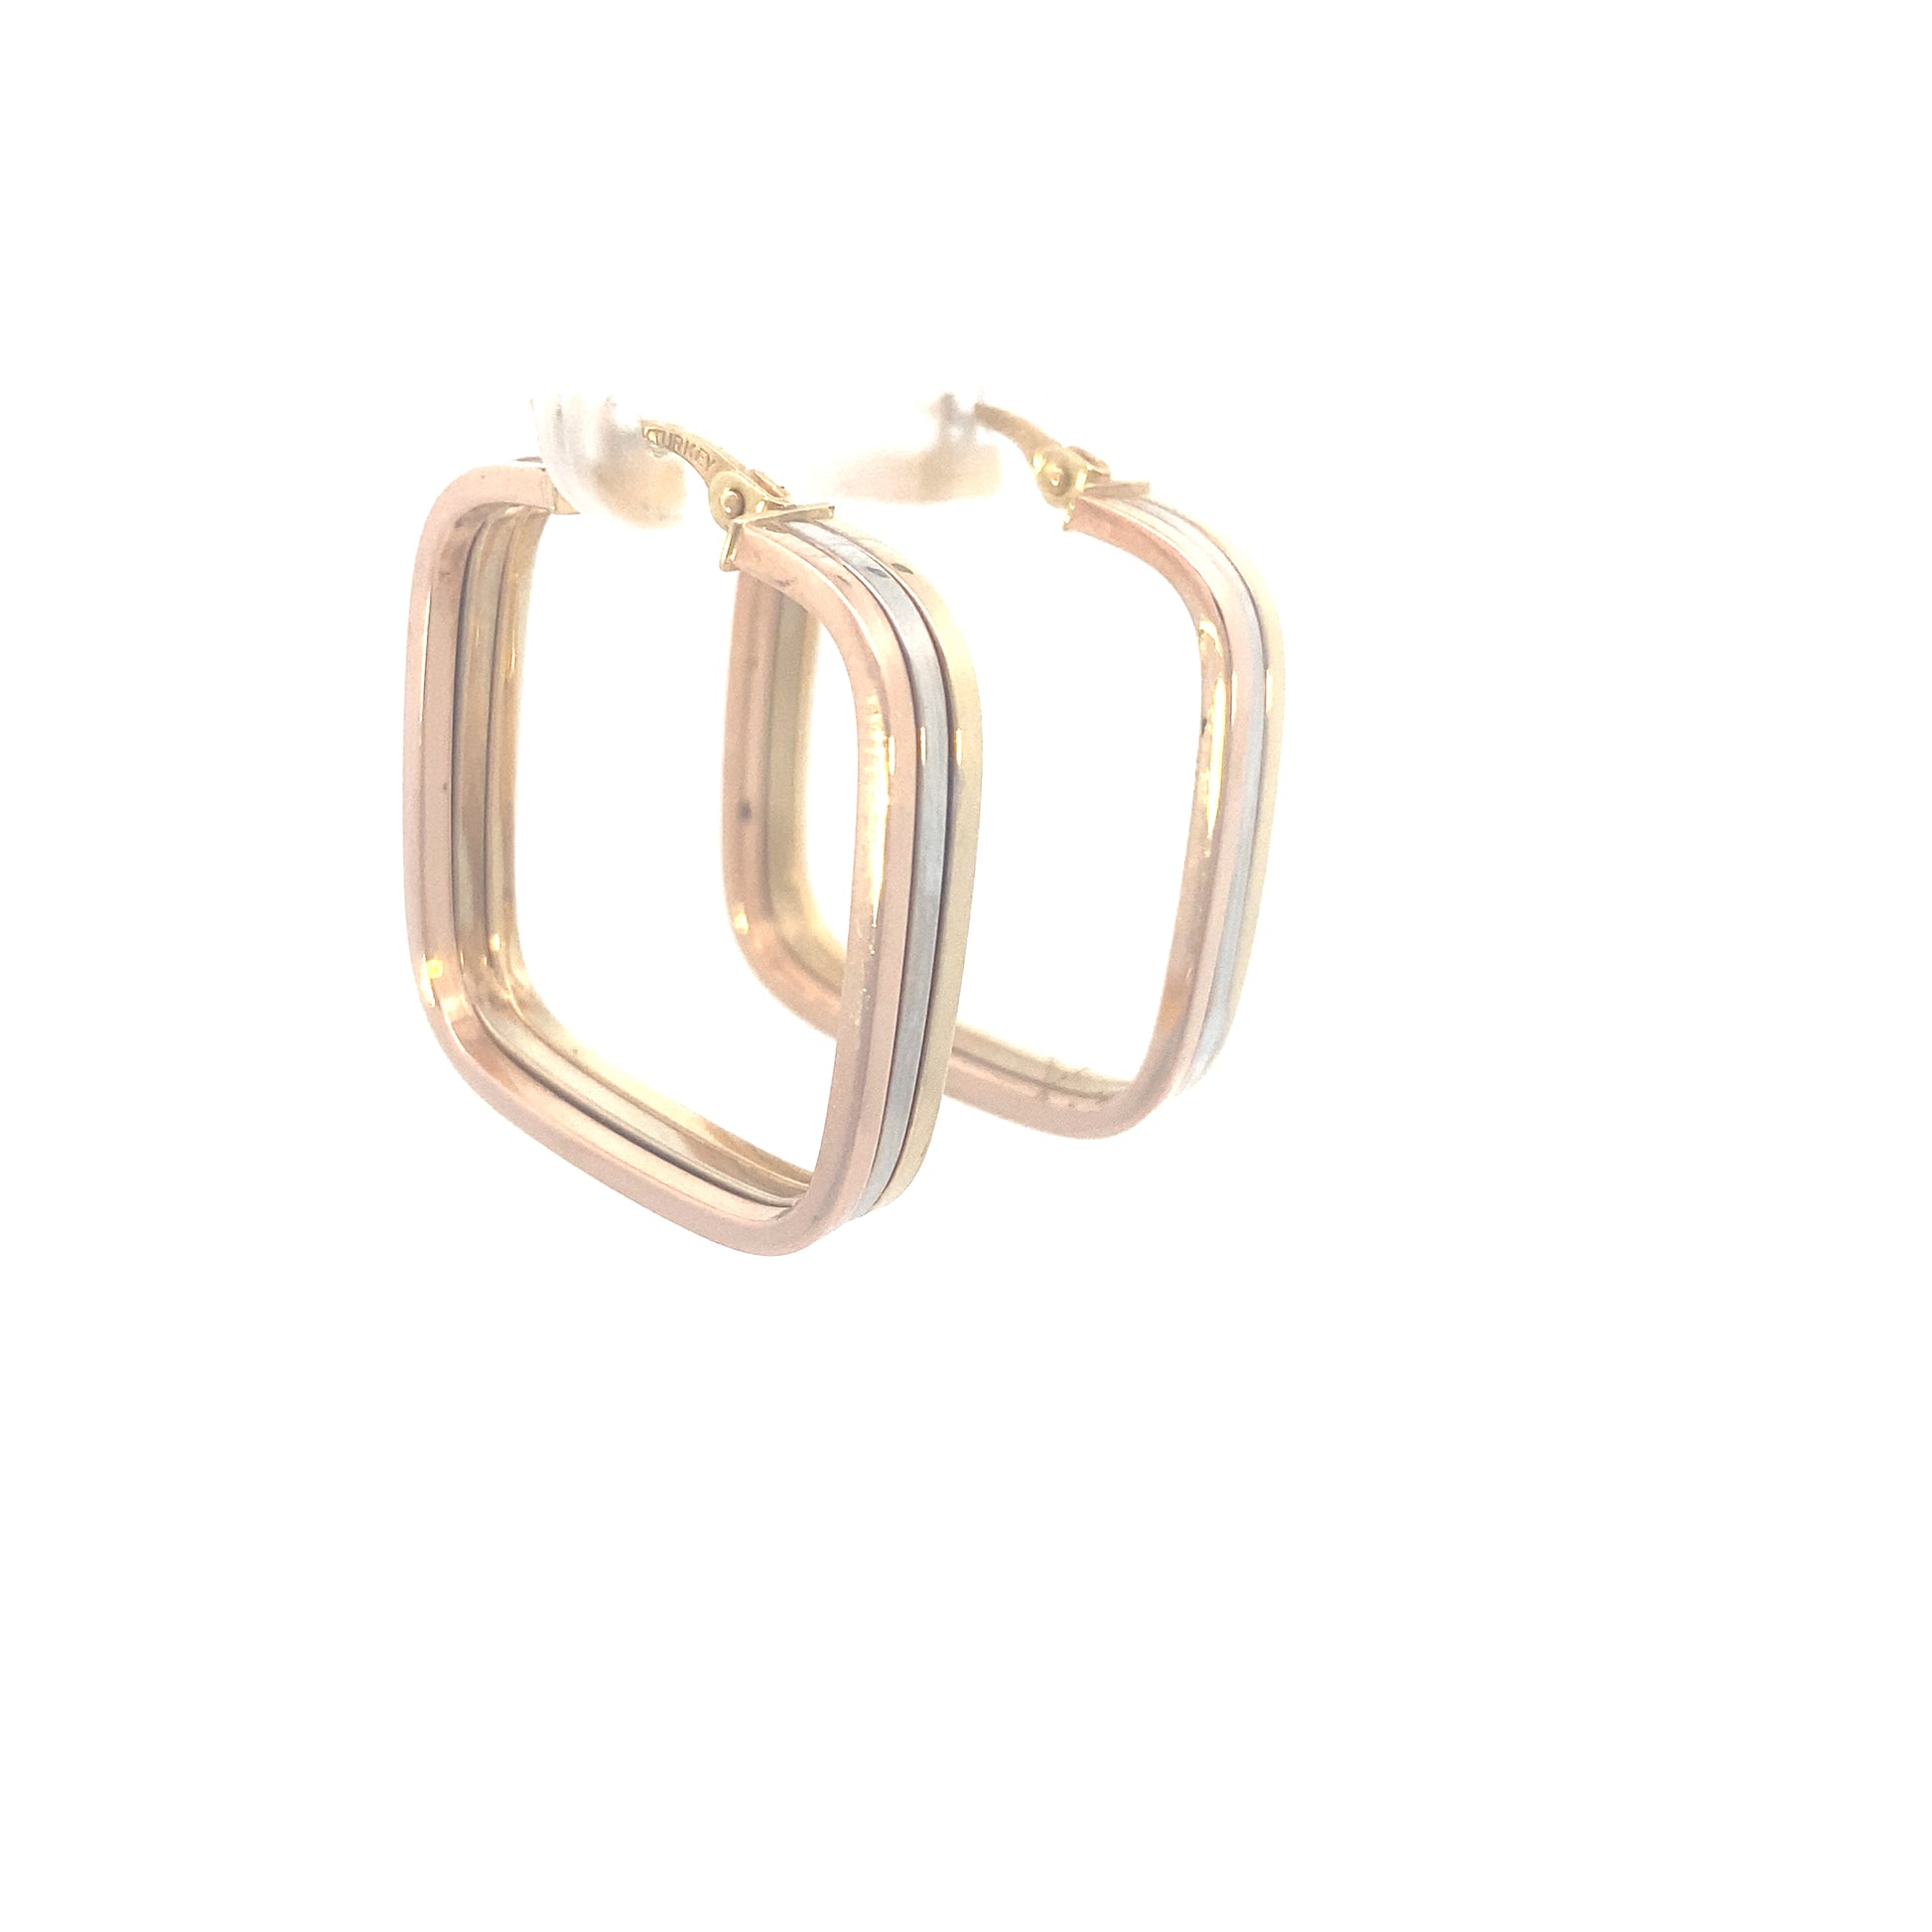 14K Square Tri-Color Gold Earrings | Luby Gold Collection | Luby 